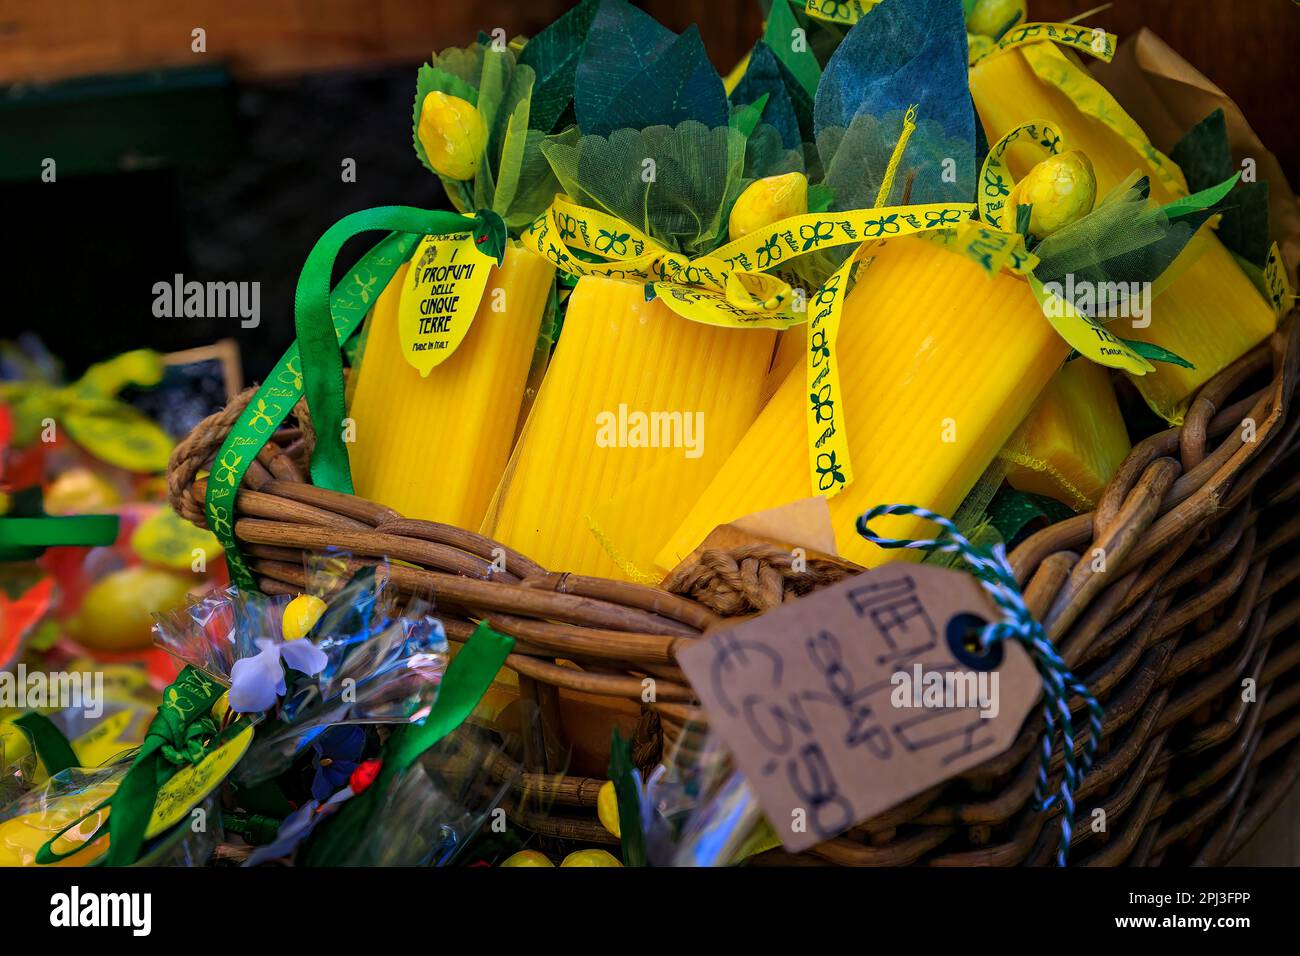 Vernazza, Italy - June 1, 2022: Souvenir soap scented with traditional  Ligurian lemons on display for sale at an old town gift shop Stock Photo -  Alamy